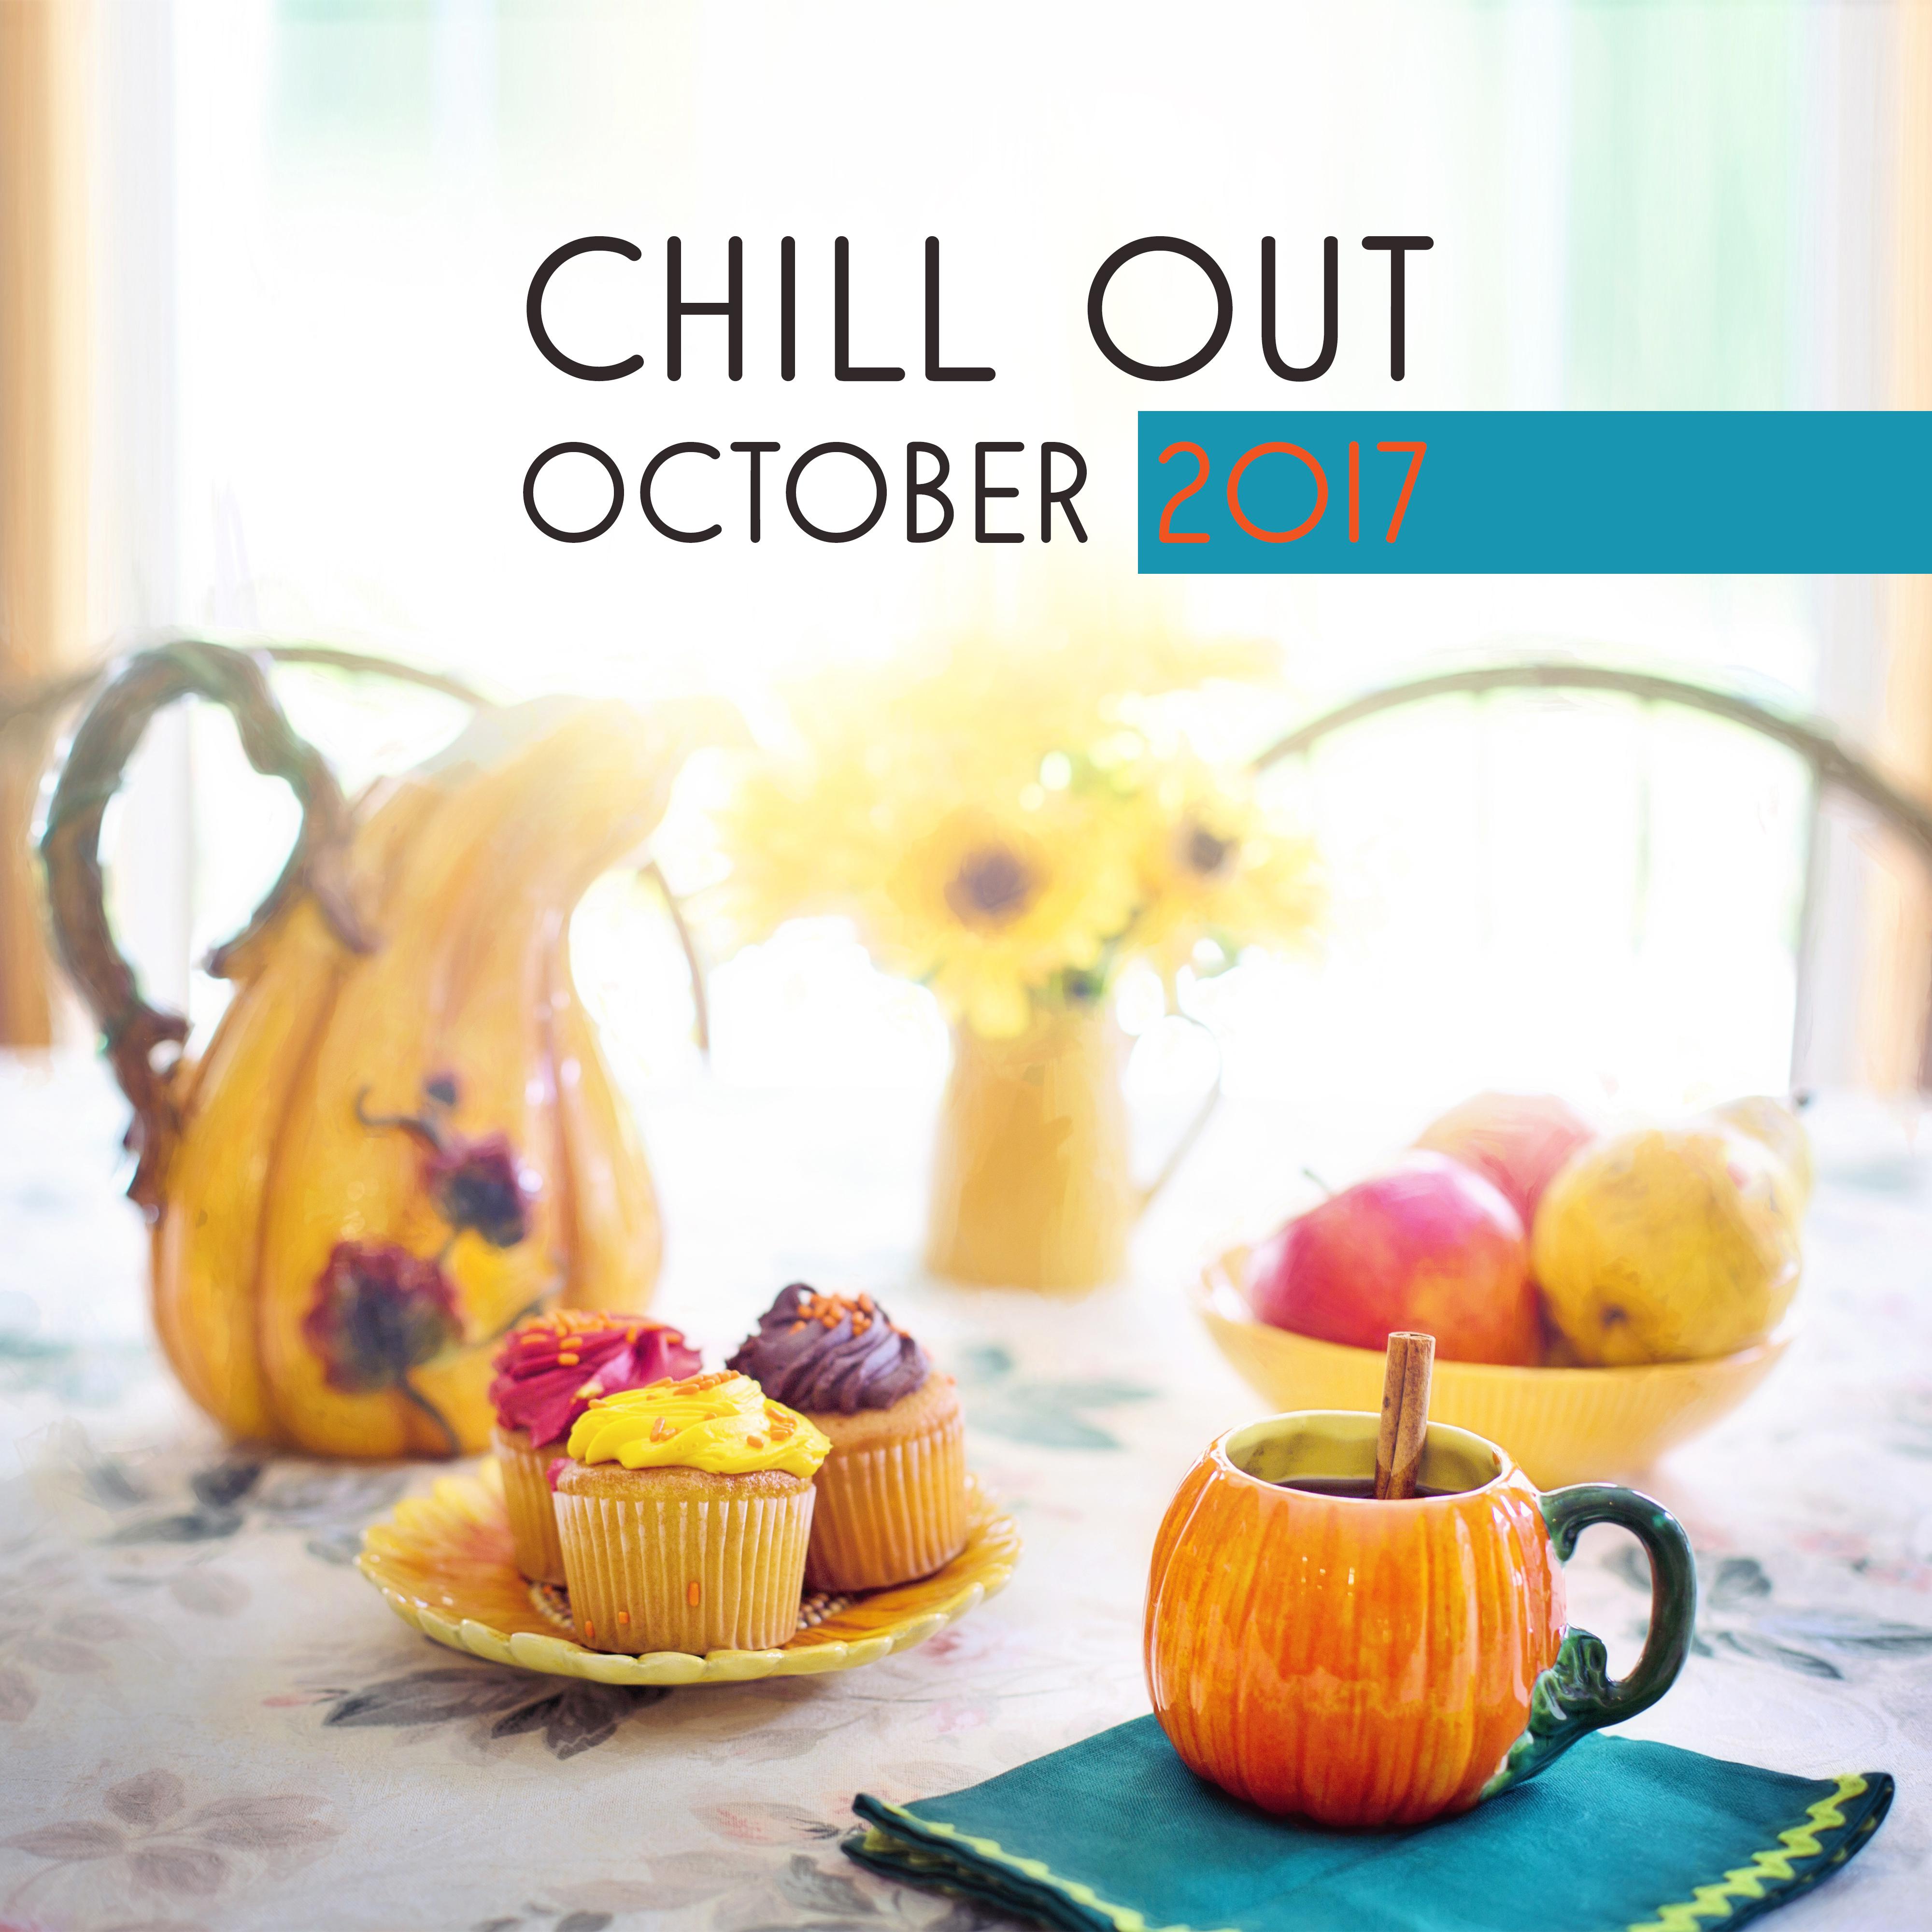 Chill Out October 2017  The Best of Chill Out 2017, Ambient, Lounge, Ibiza Club, Relax, Party Music, Dance